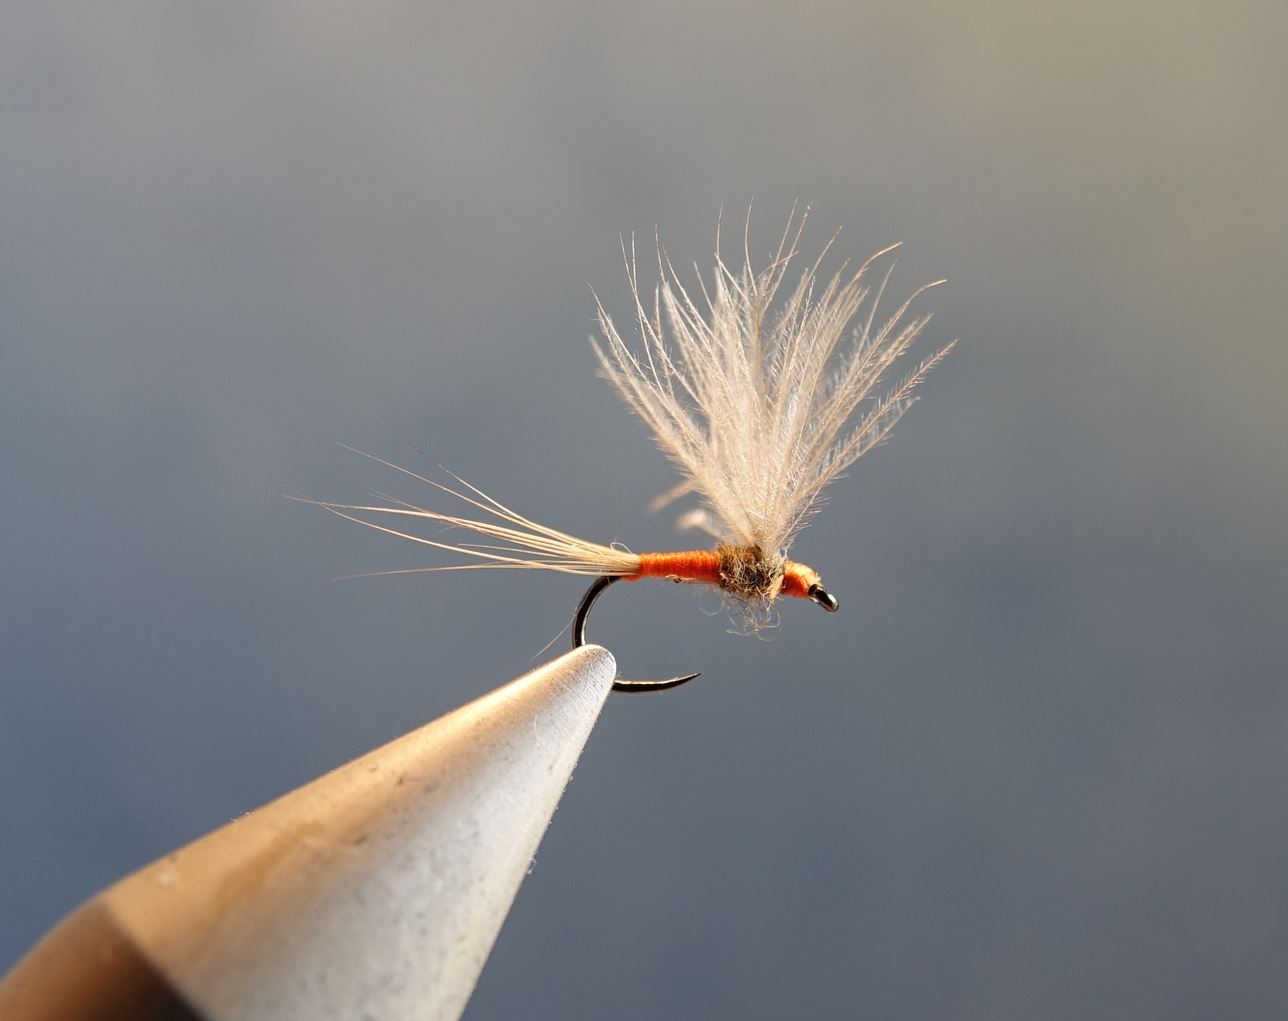 Raccon raton laveur poil fur cerque tail fly mouche flytying eclosion